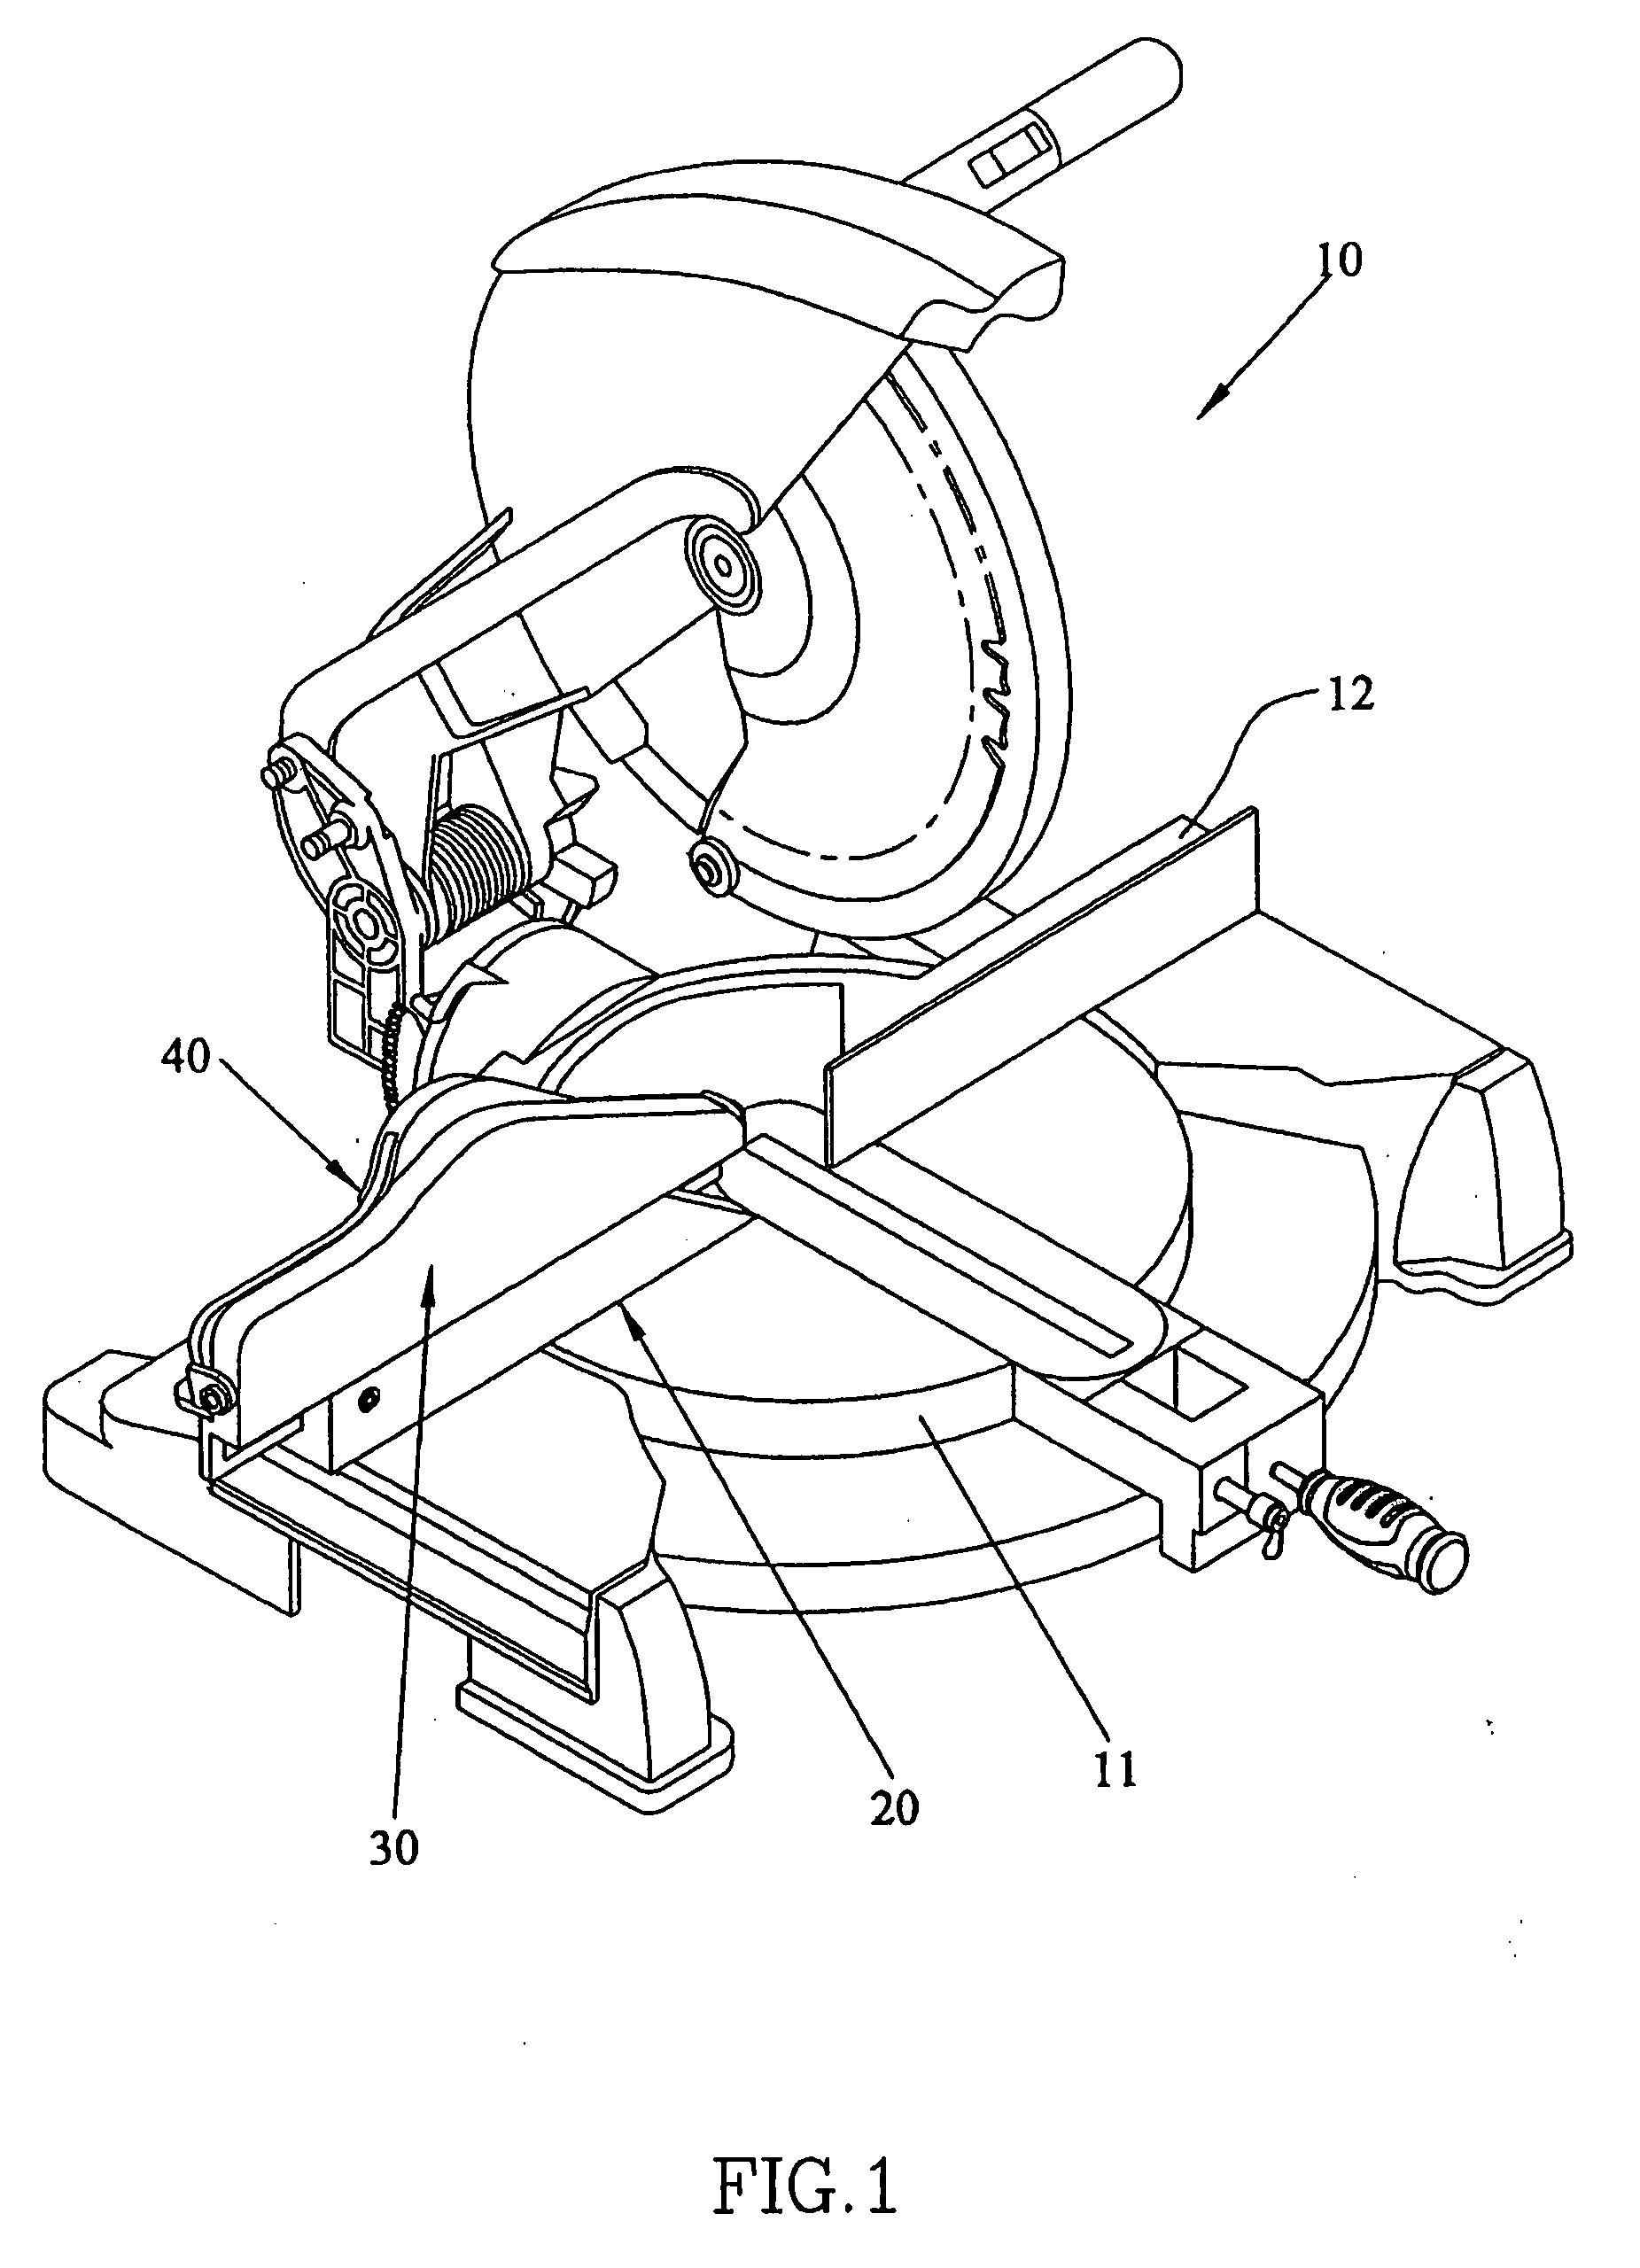 Fence assembly for cut-off machine